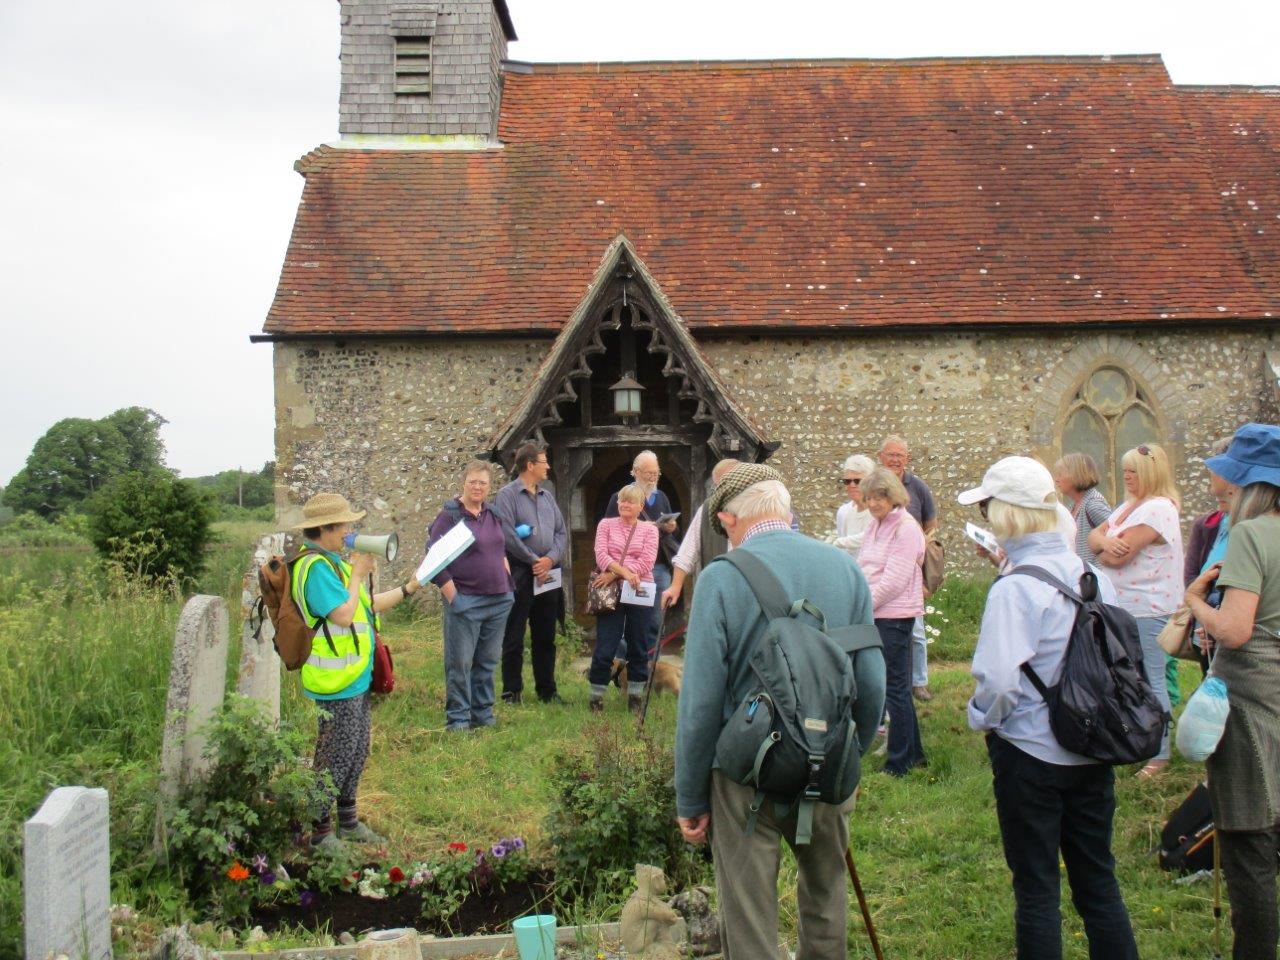 Binsted Arts Festival - Reading by Michael Wishart's grave